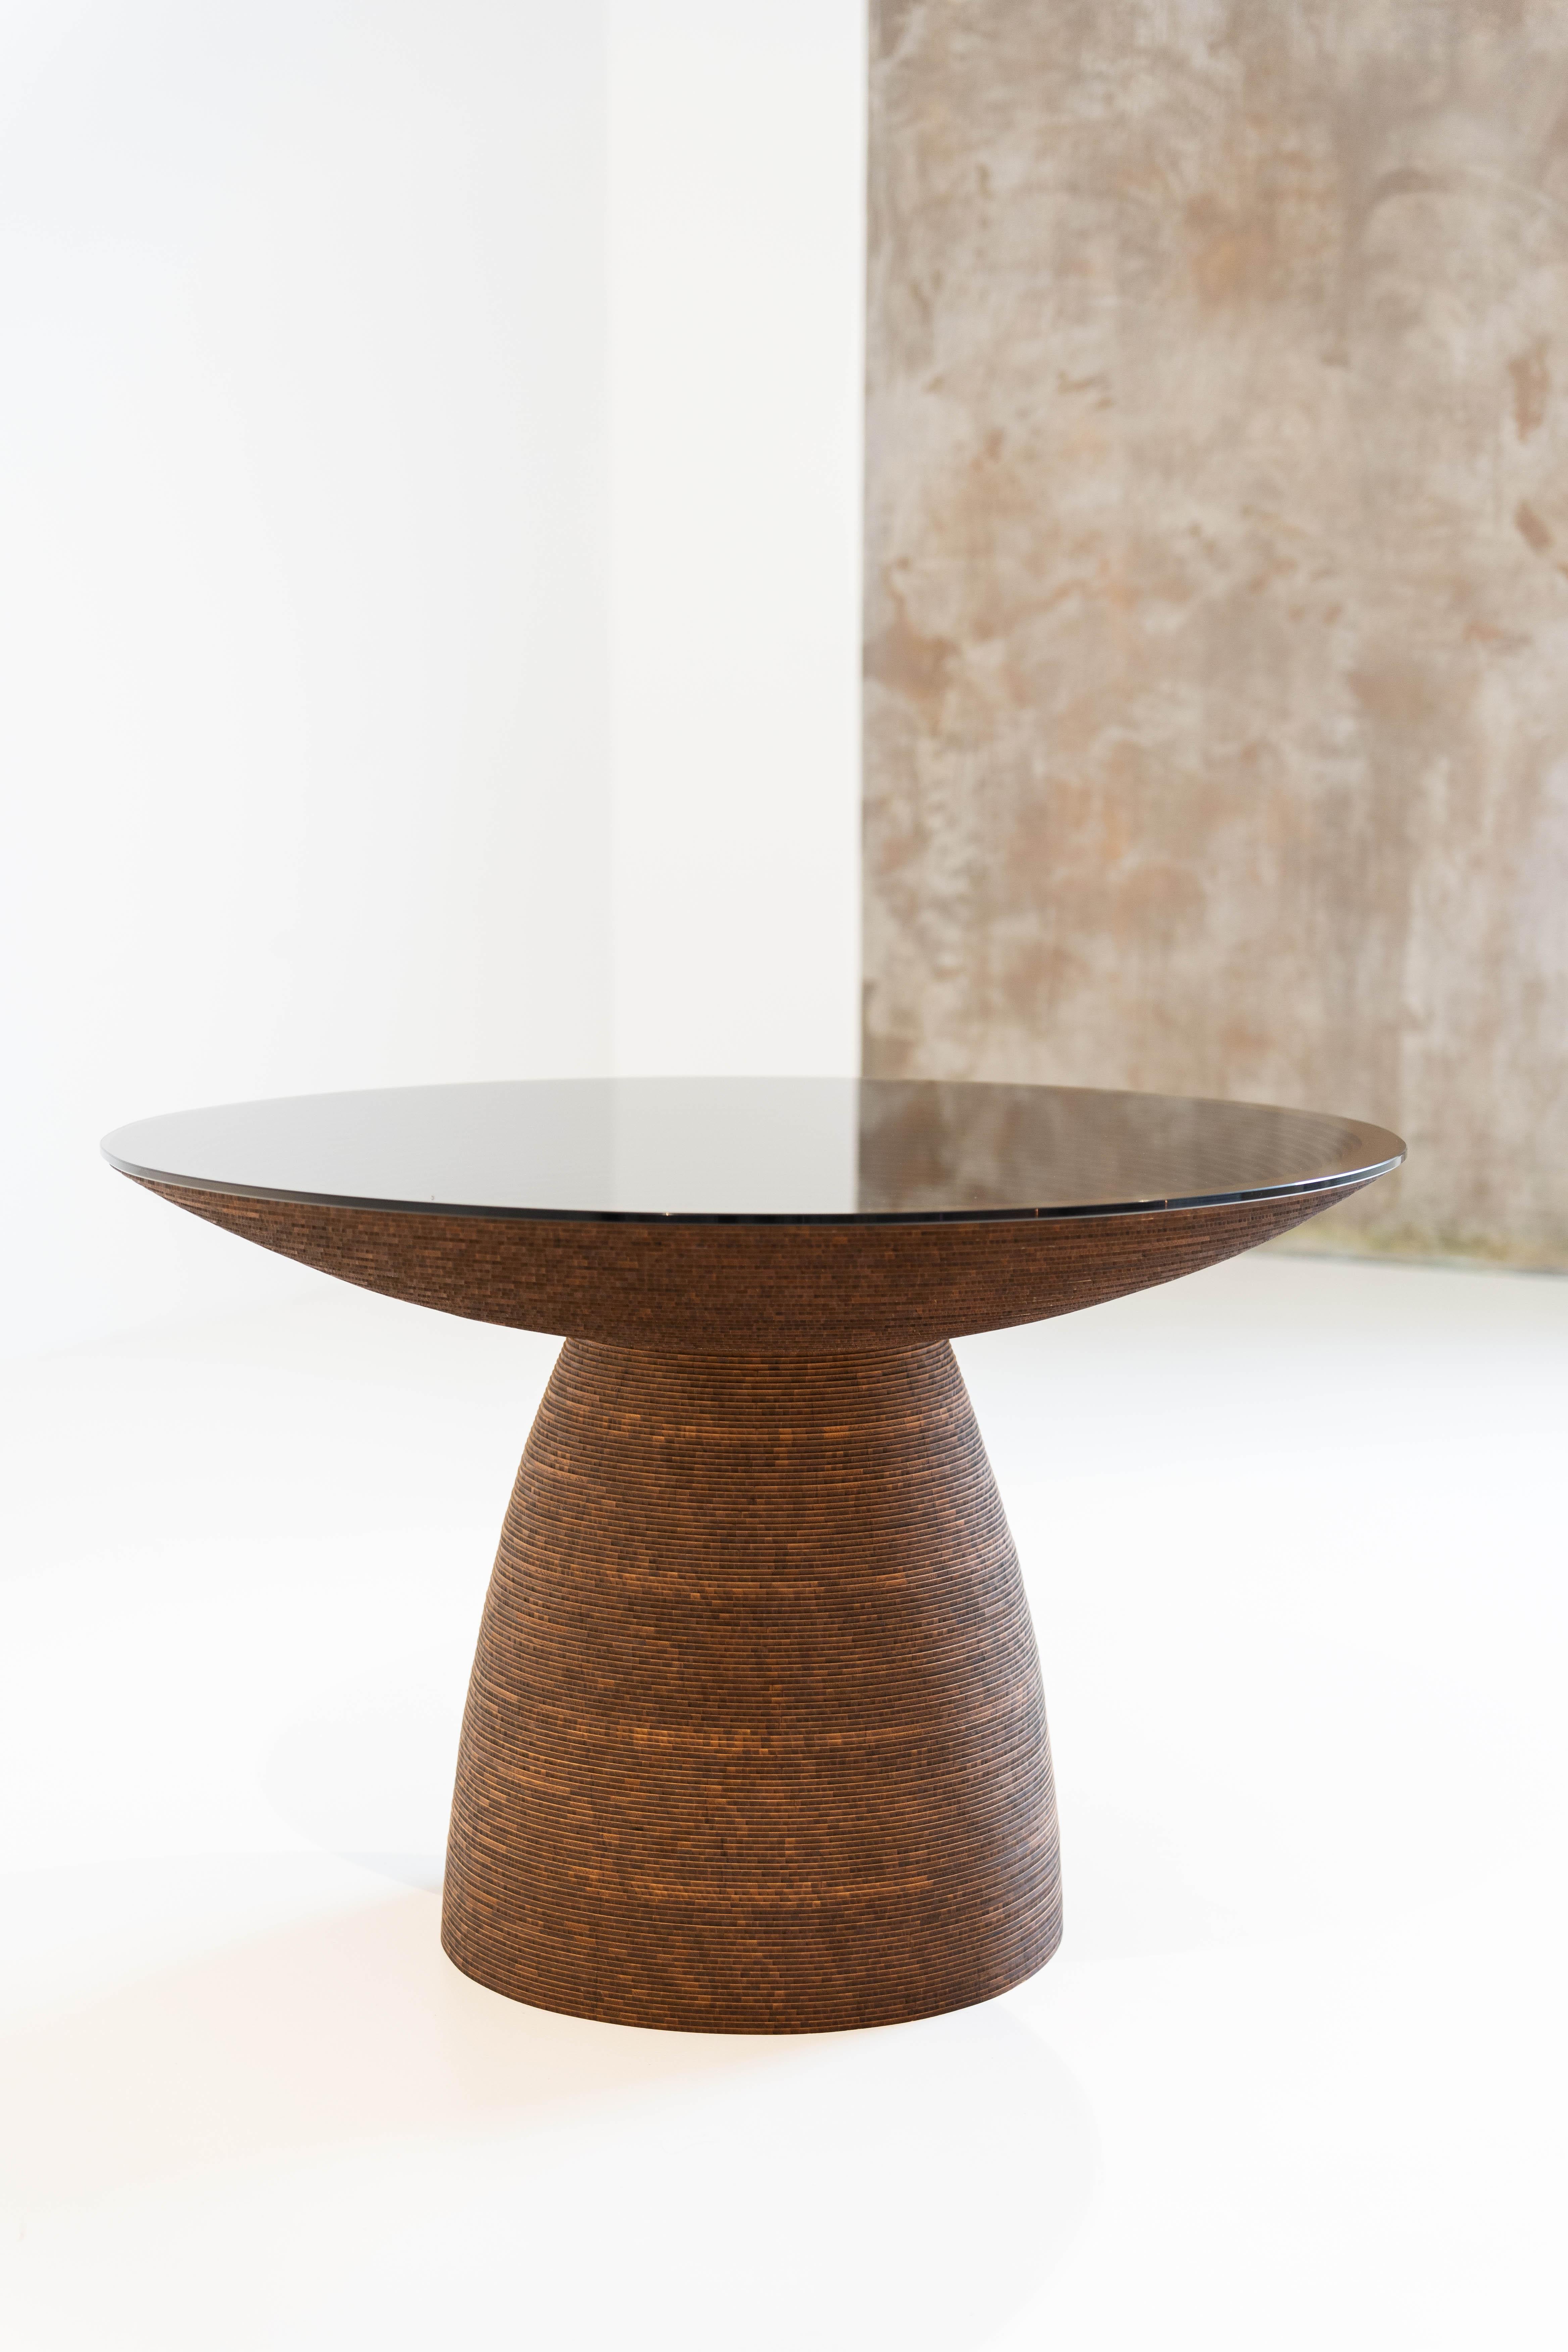 Post-Modern Stratum Saxum Bamboo Dining Table II by Daan De Wit